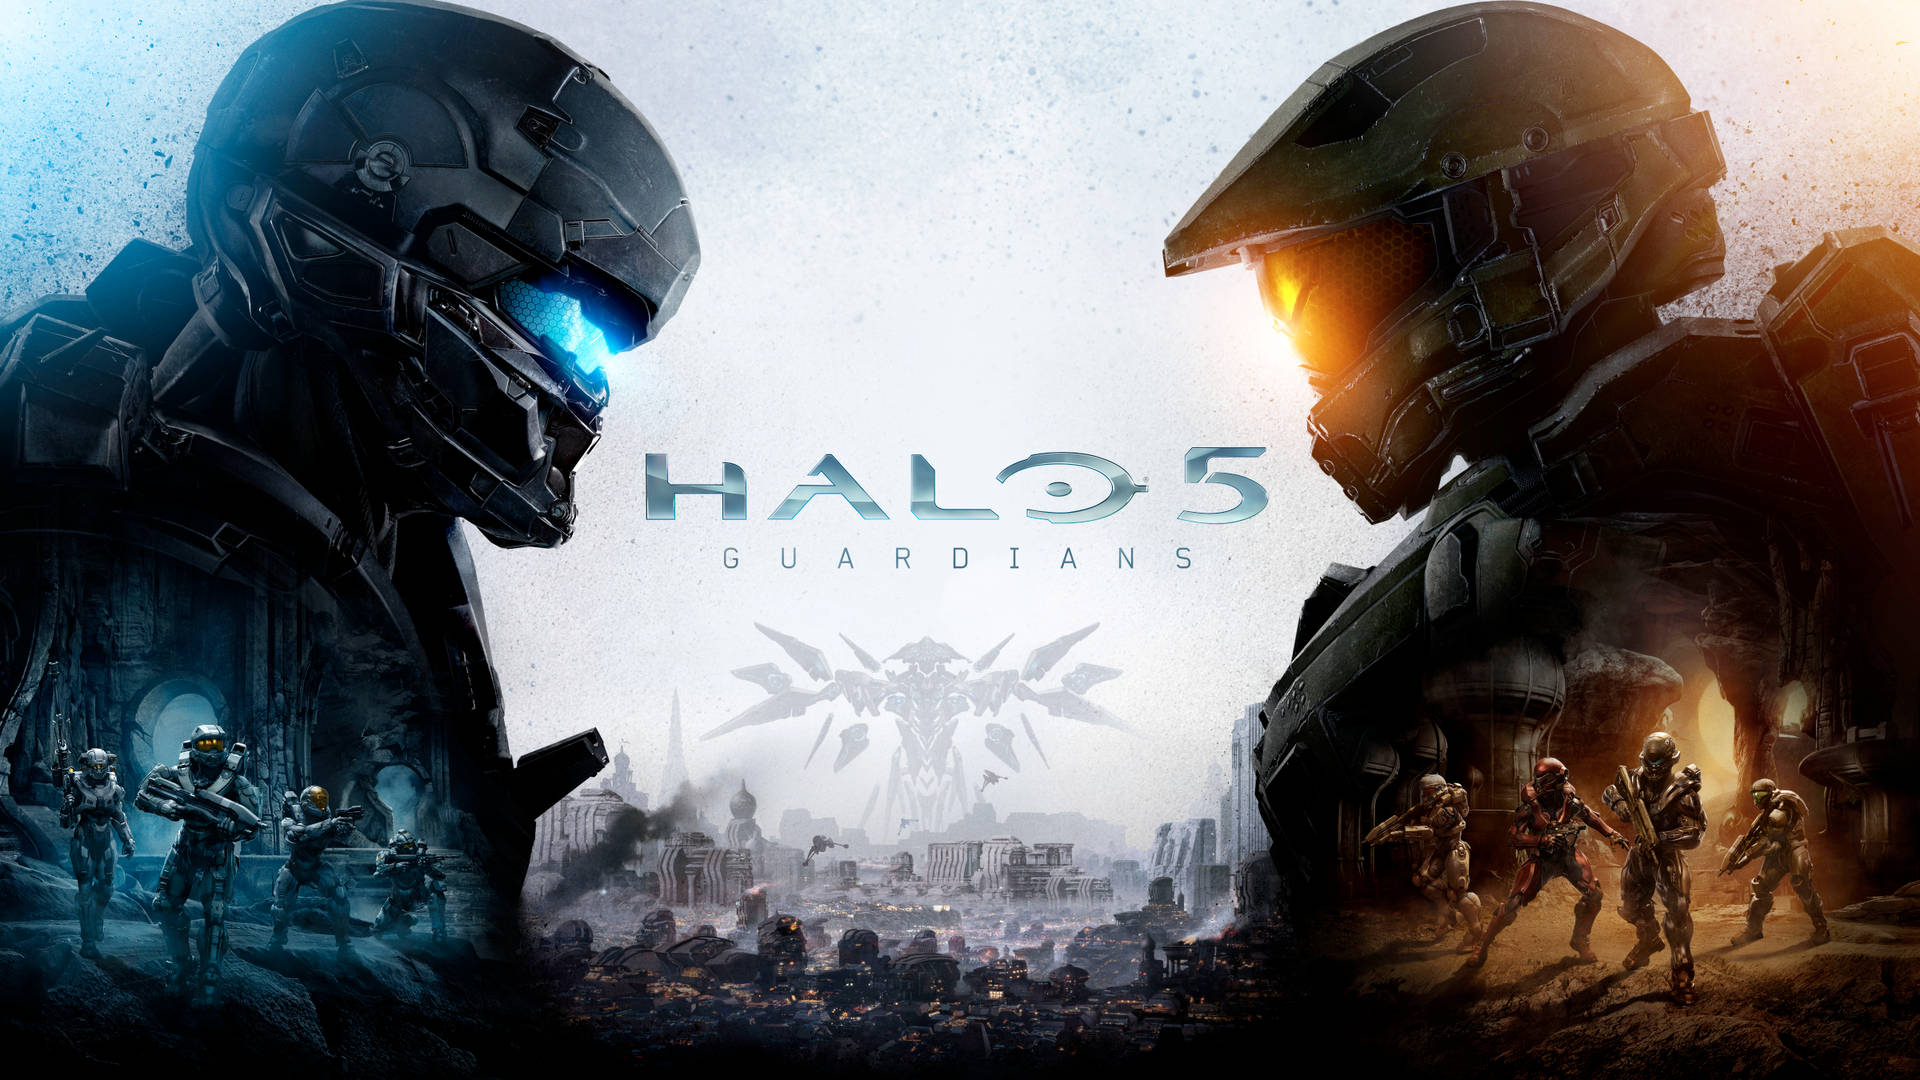 Exciting Battle Scene From Halo 5 In Stunning 4k Resolution